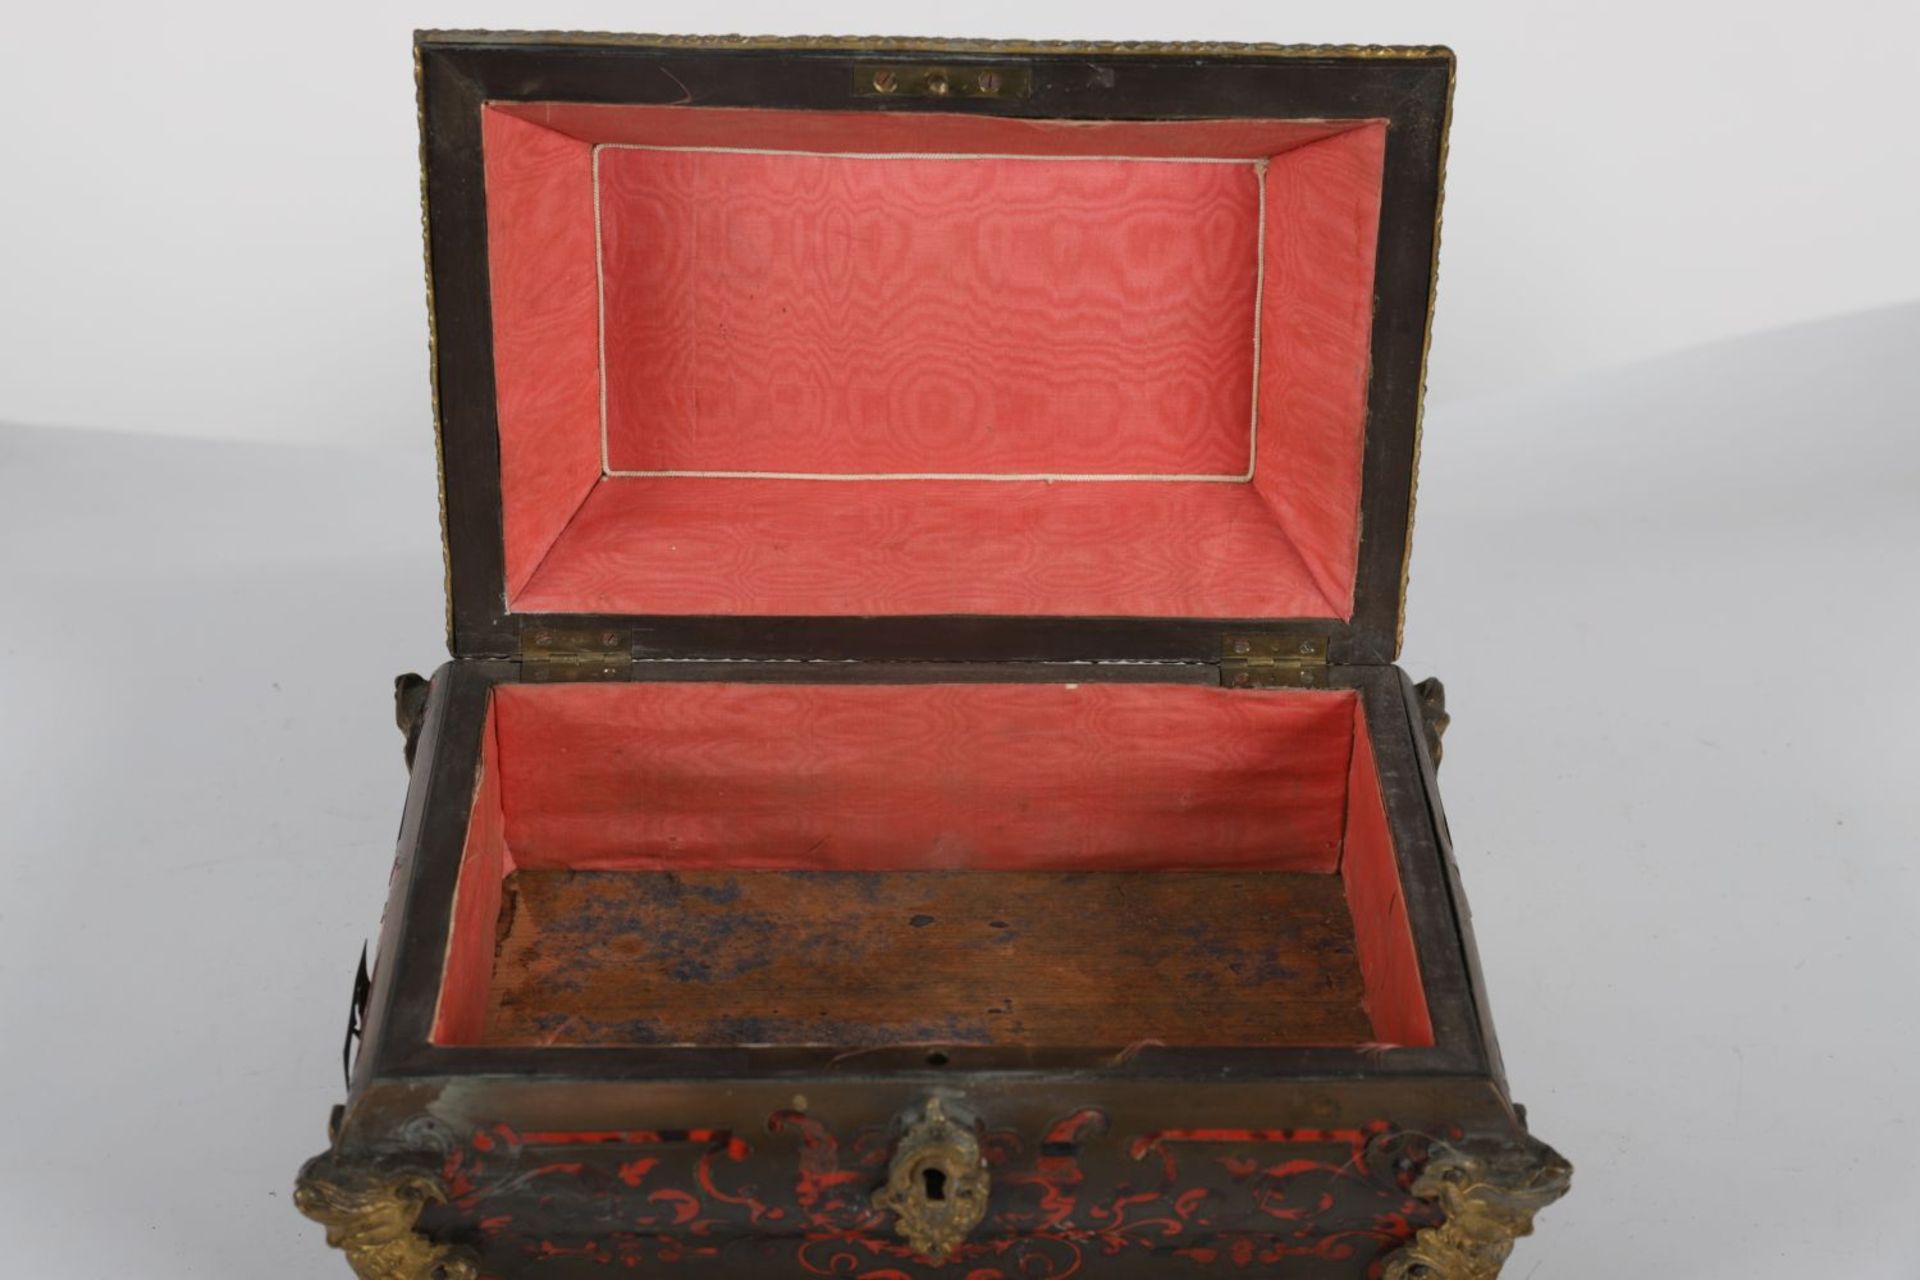 19TH-CENTURY FRENCH BUHL JEWELLERY BOX - Image 3 of 3